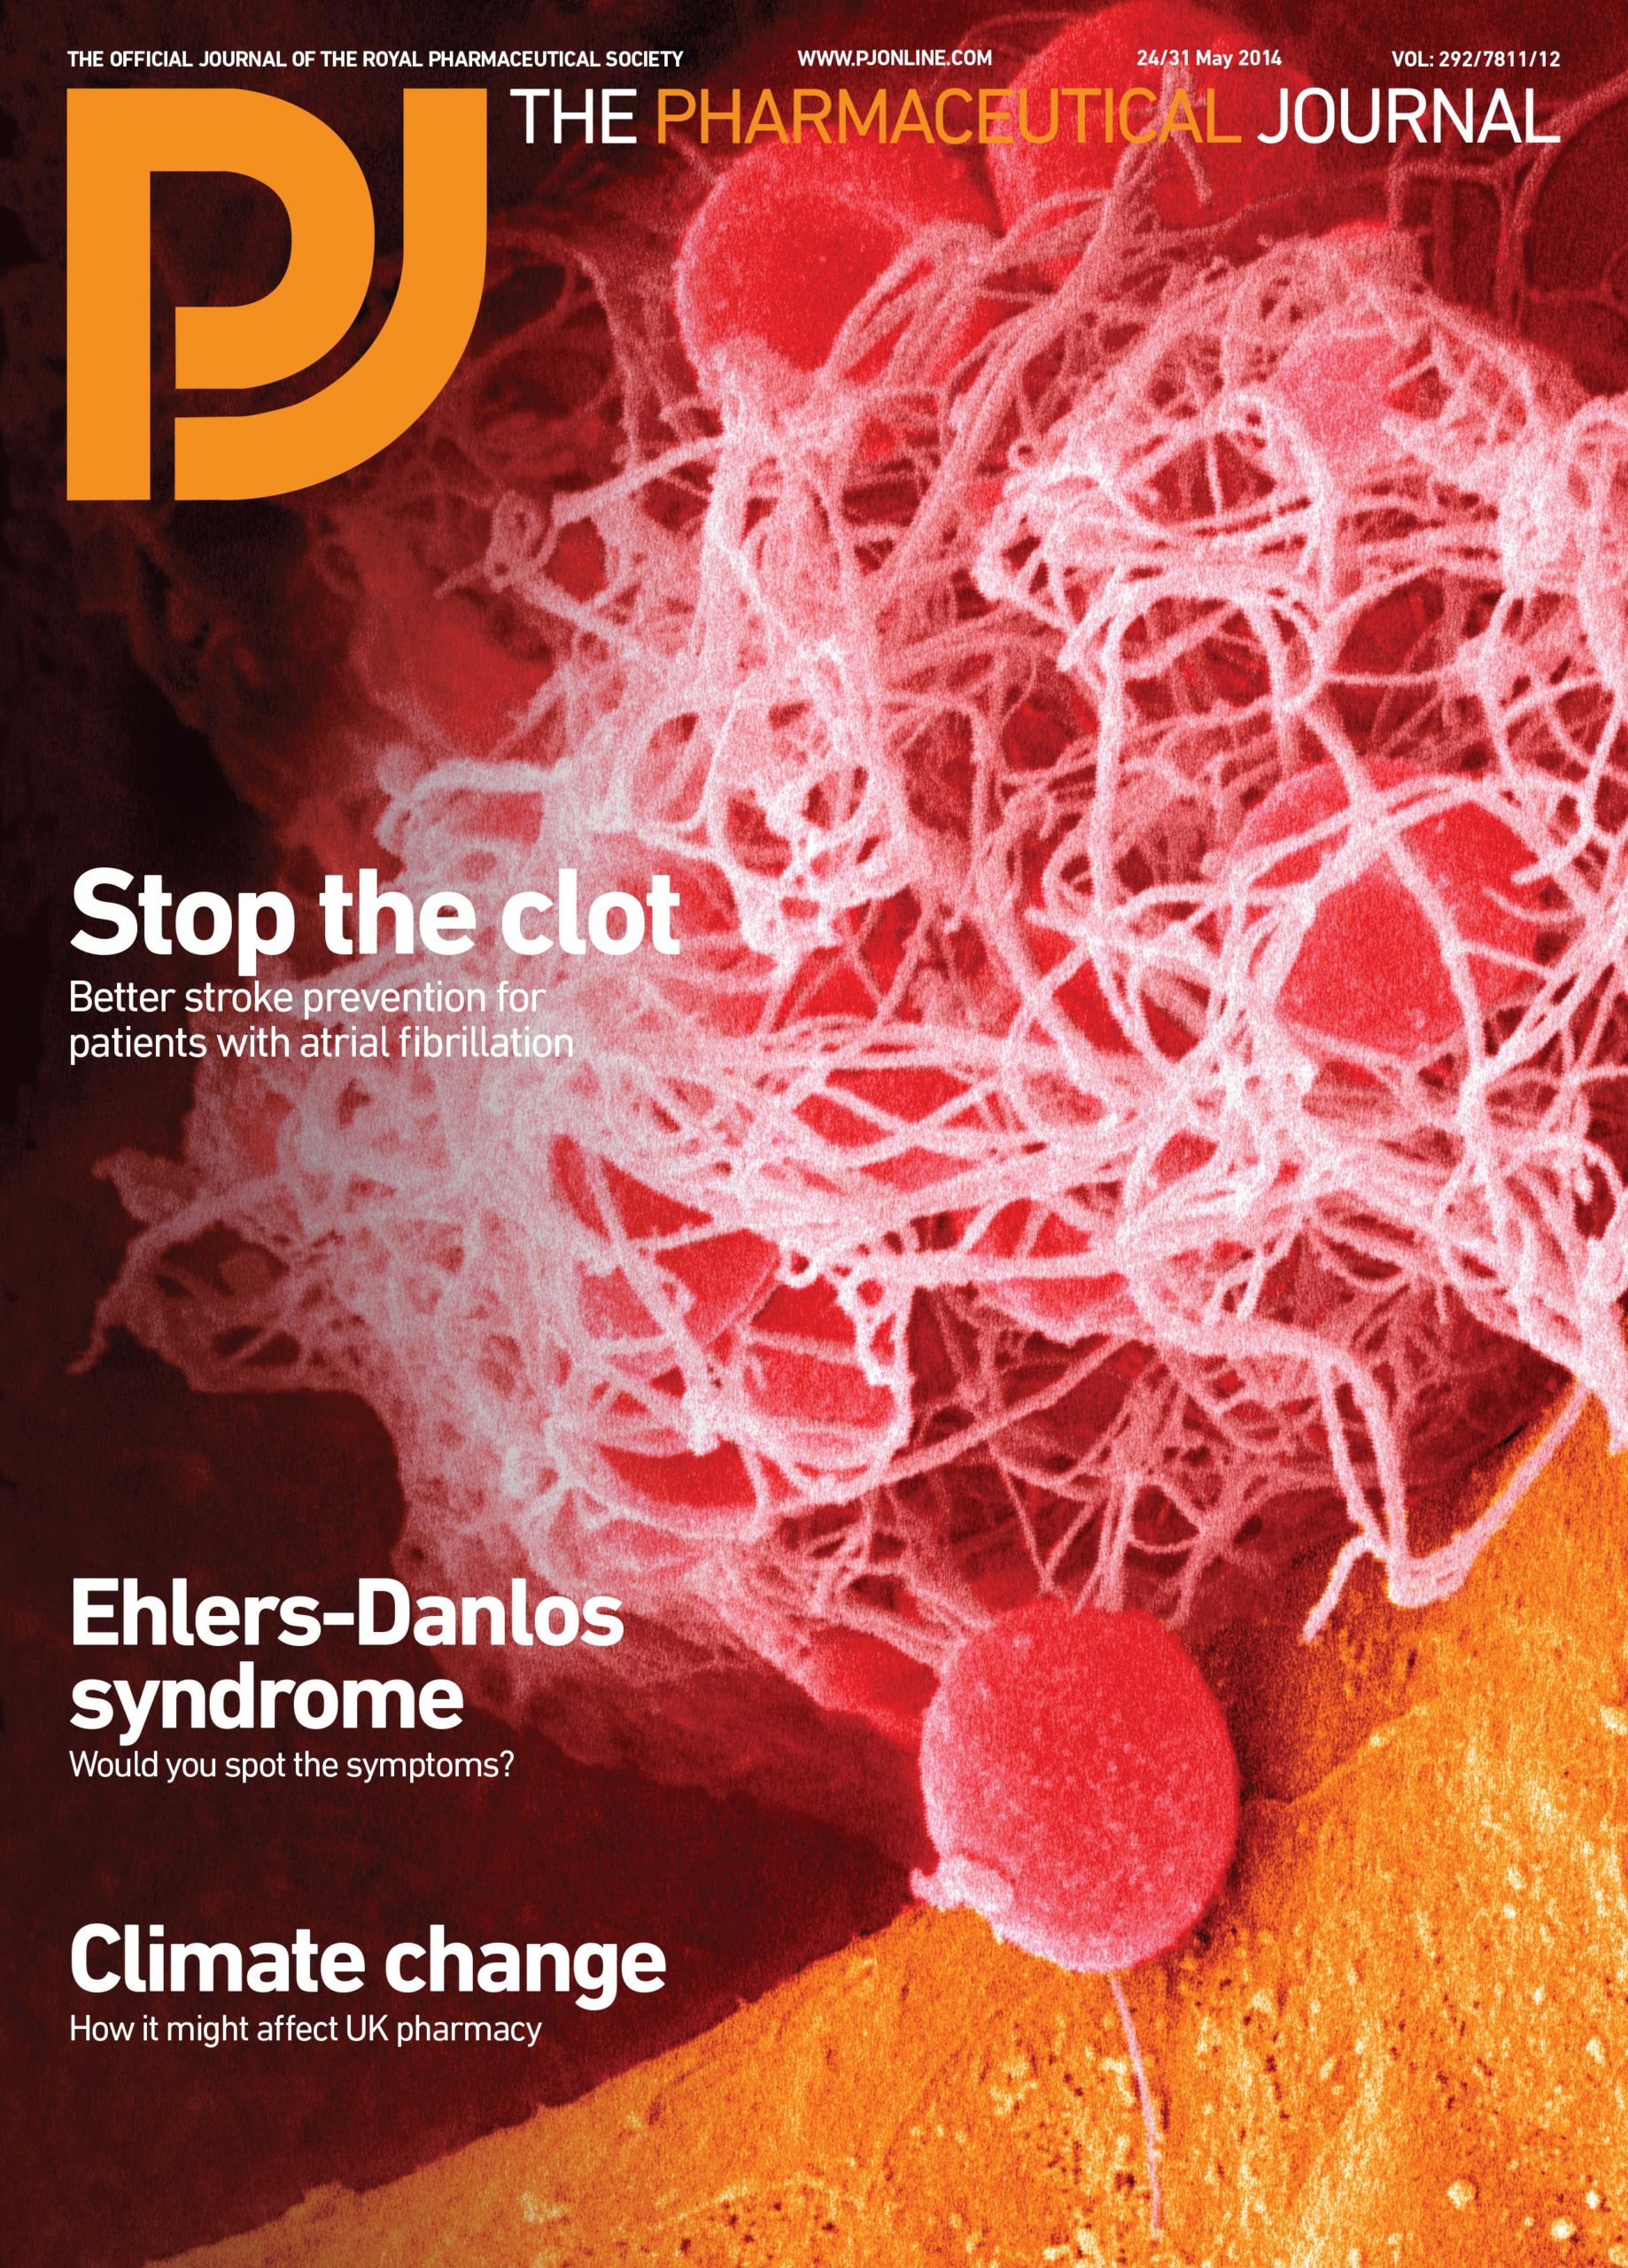 Publication issue cover for PJ, 24/31 May 2014, Vol 292, No 7811/2